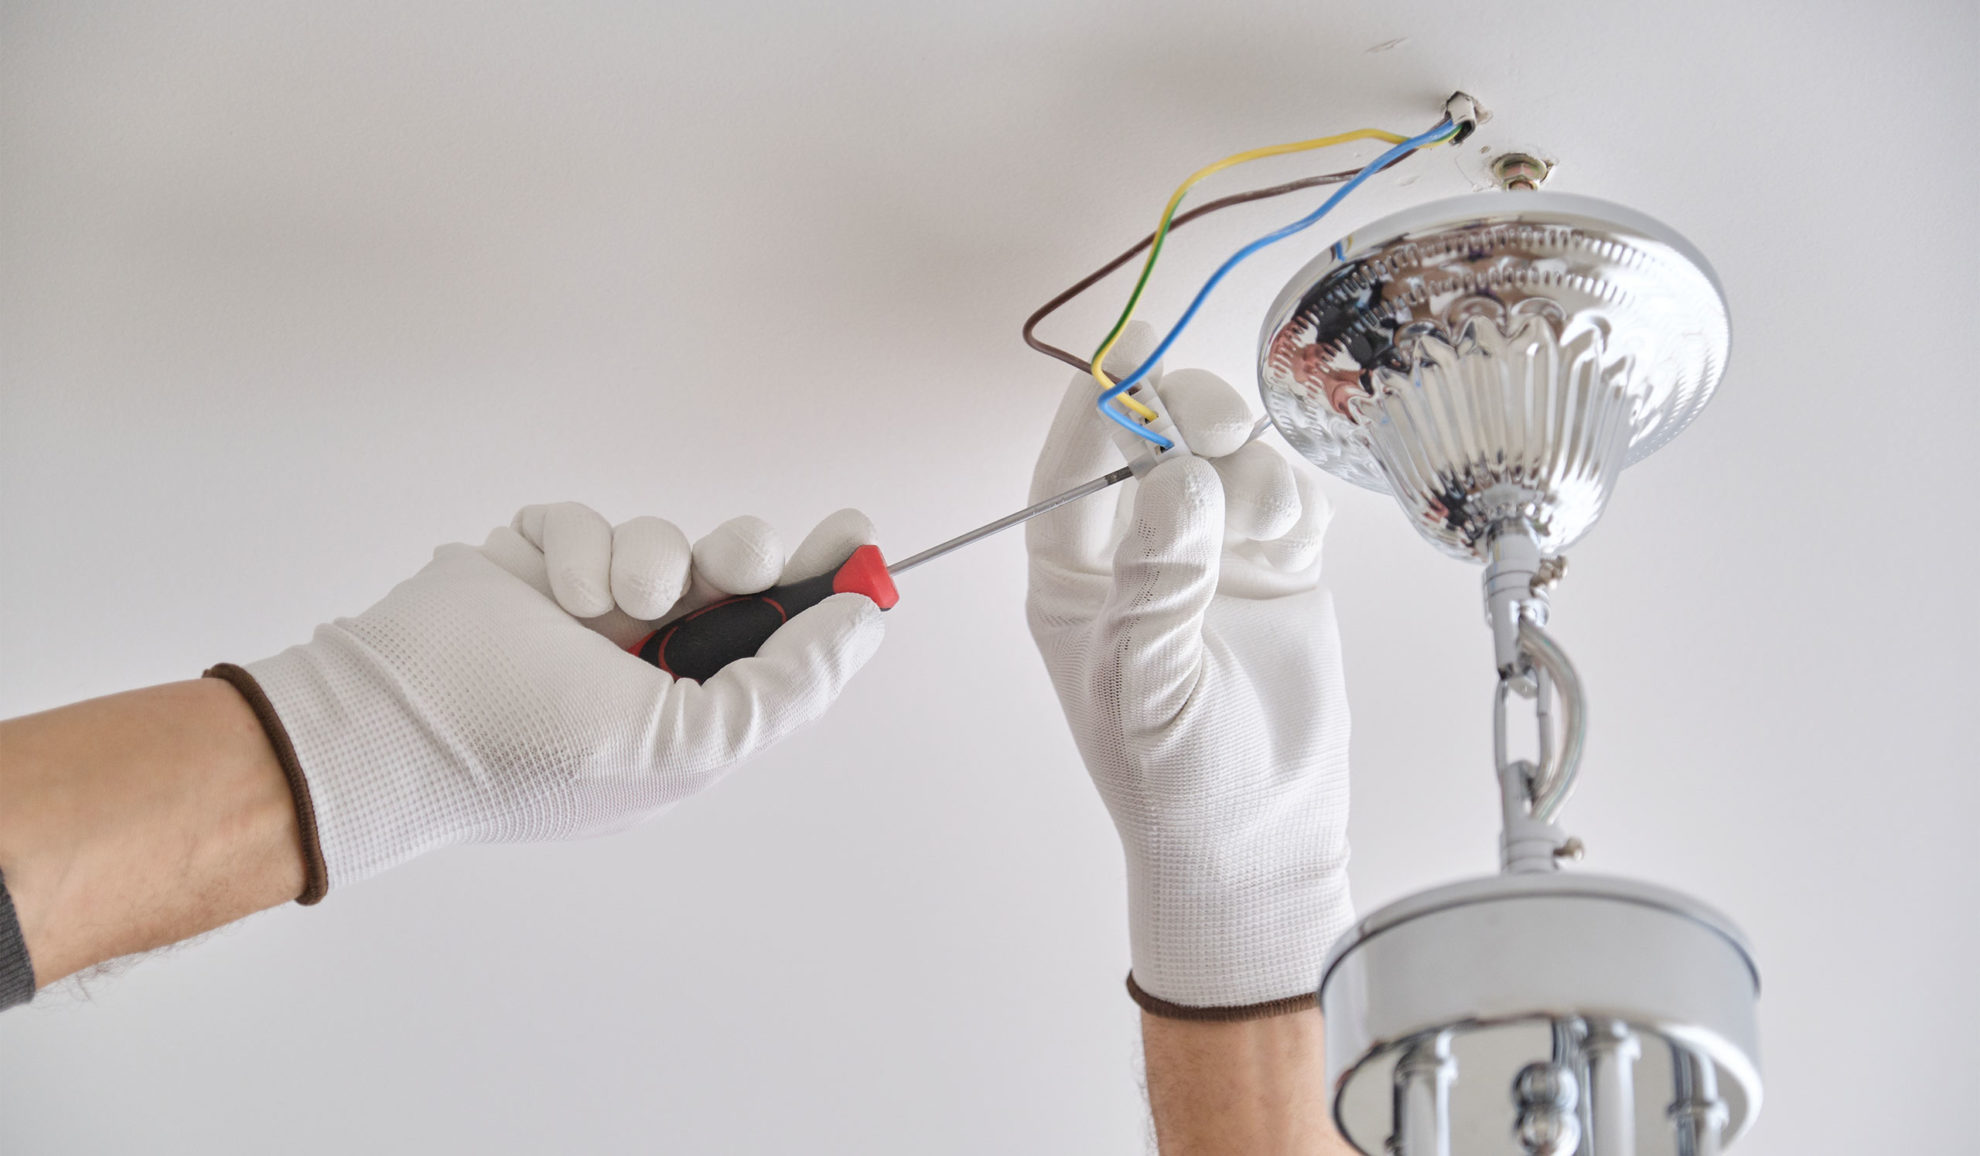 contractor-hands-with-gloves-and-screwdriver-close-up-repairing-ceiling-lamp-auburn-ca